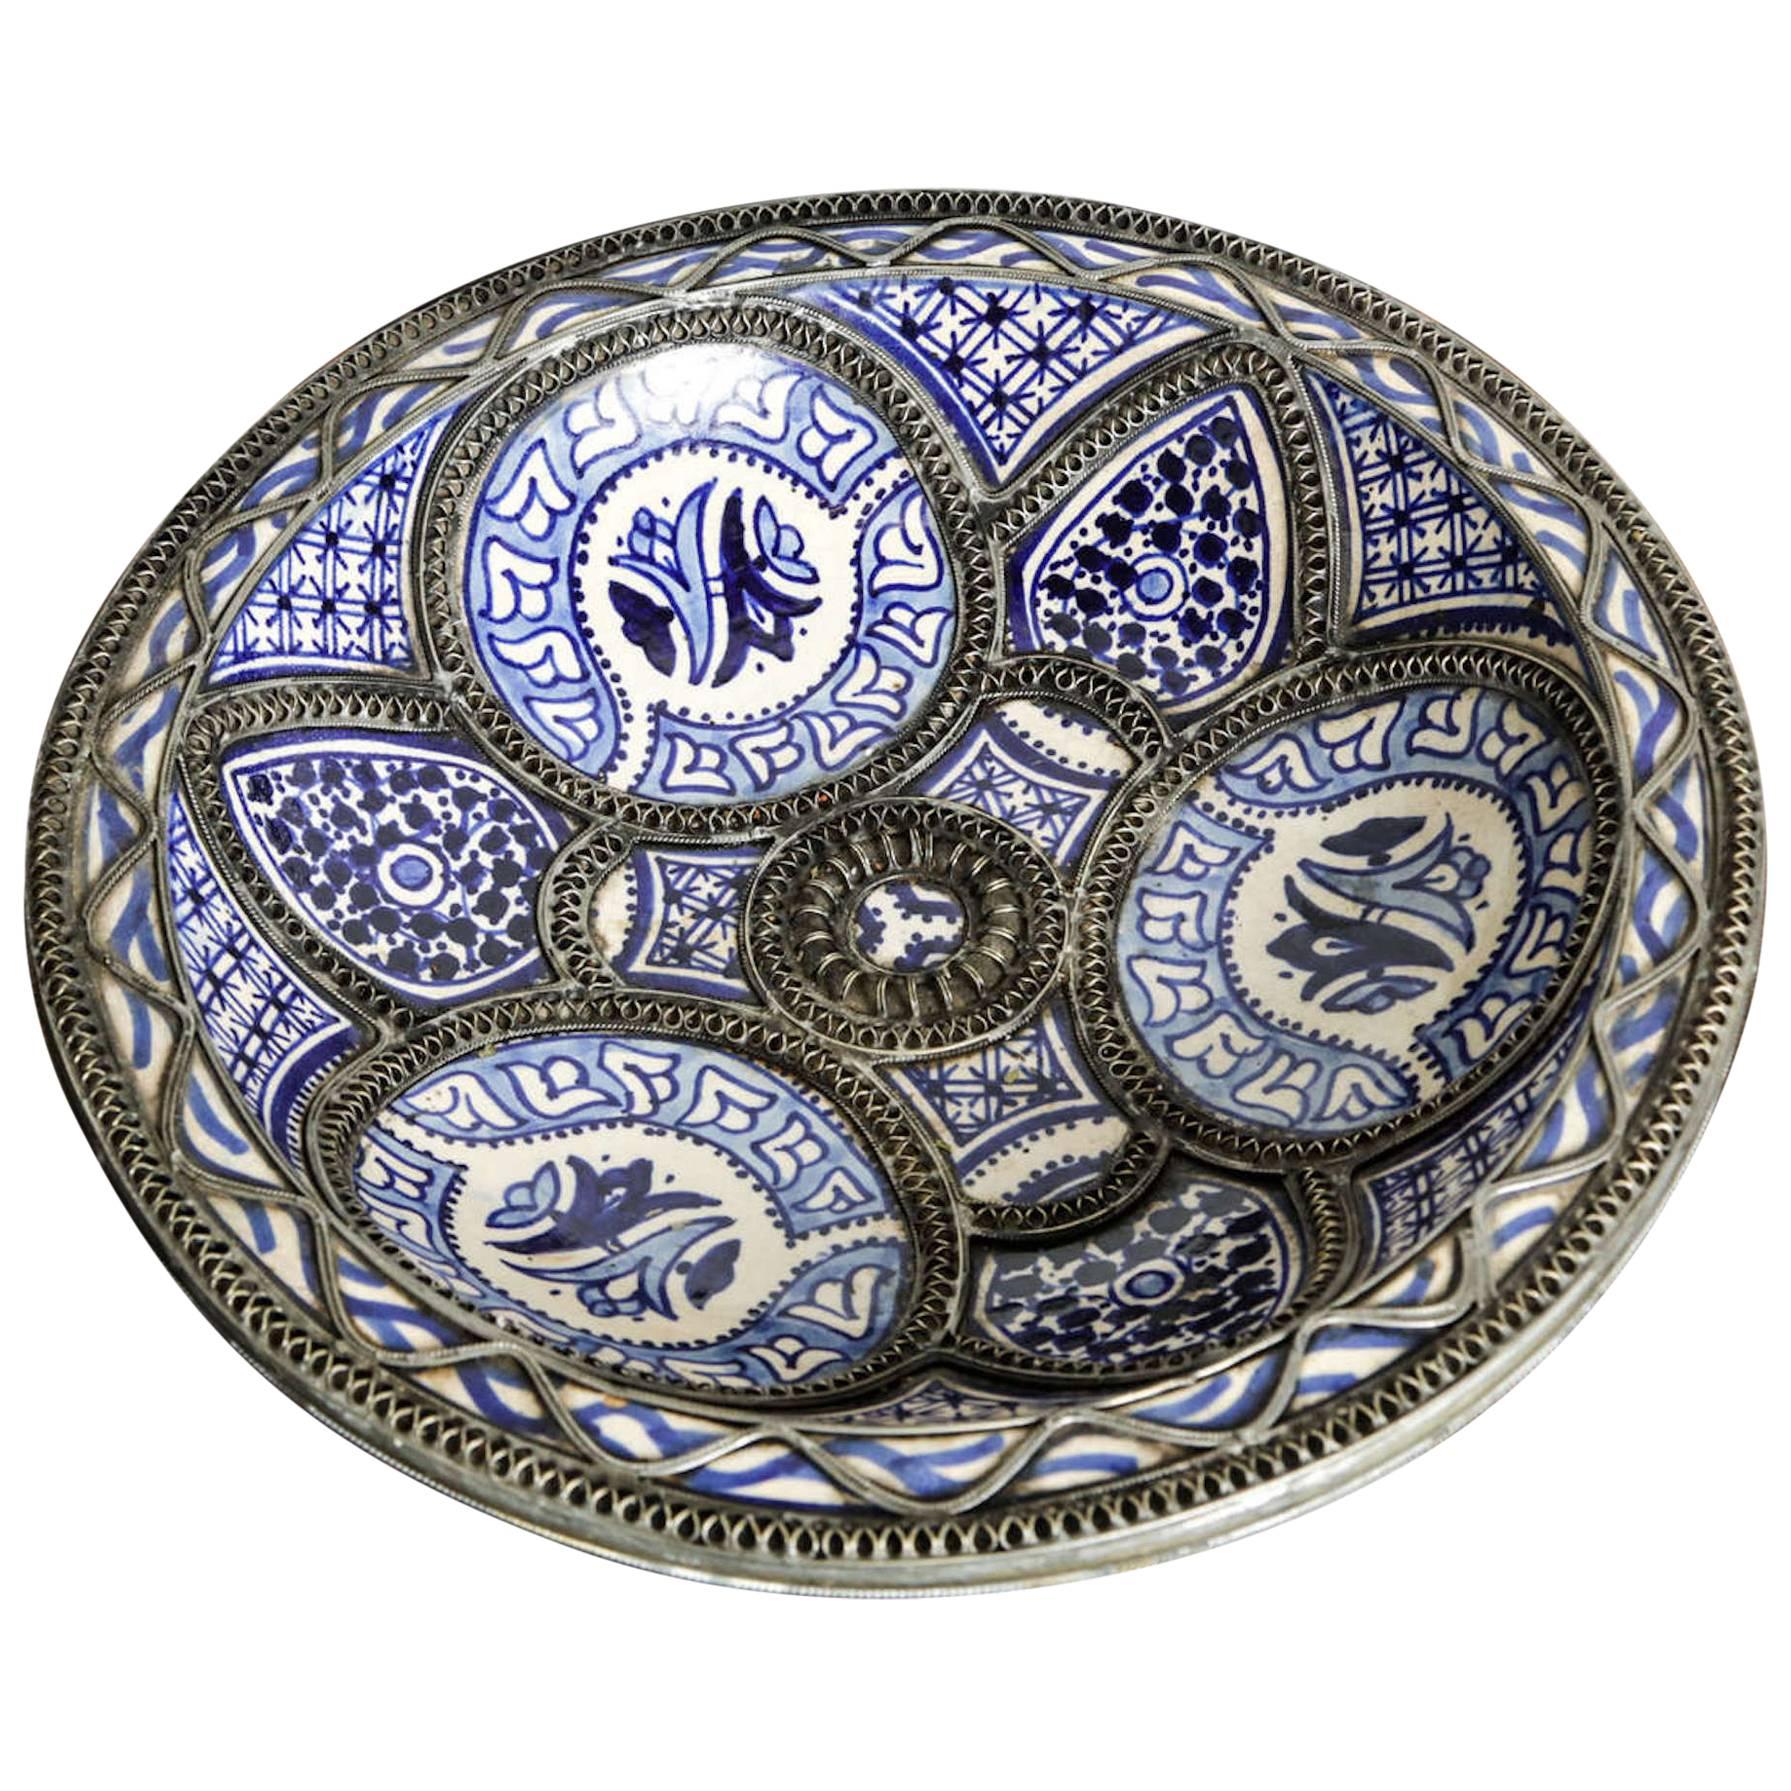 Moroccan Fez Ceramic Plate in Blue and White Adorned with Filigree